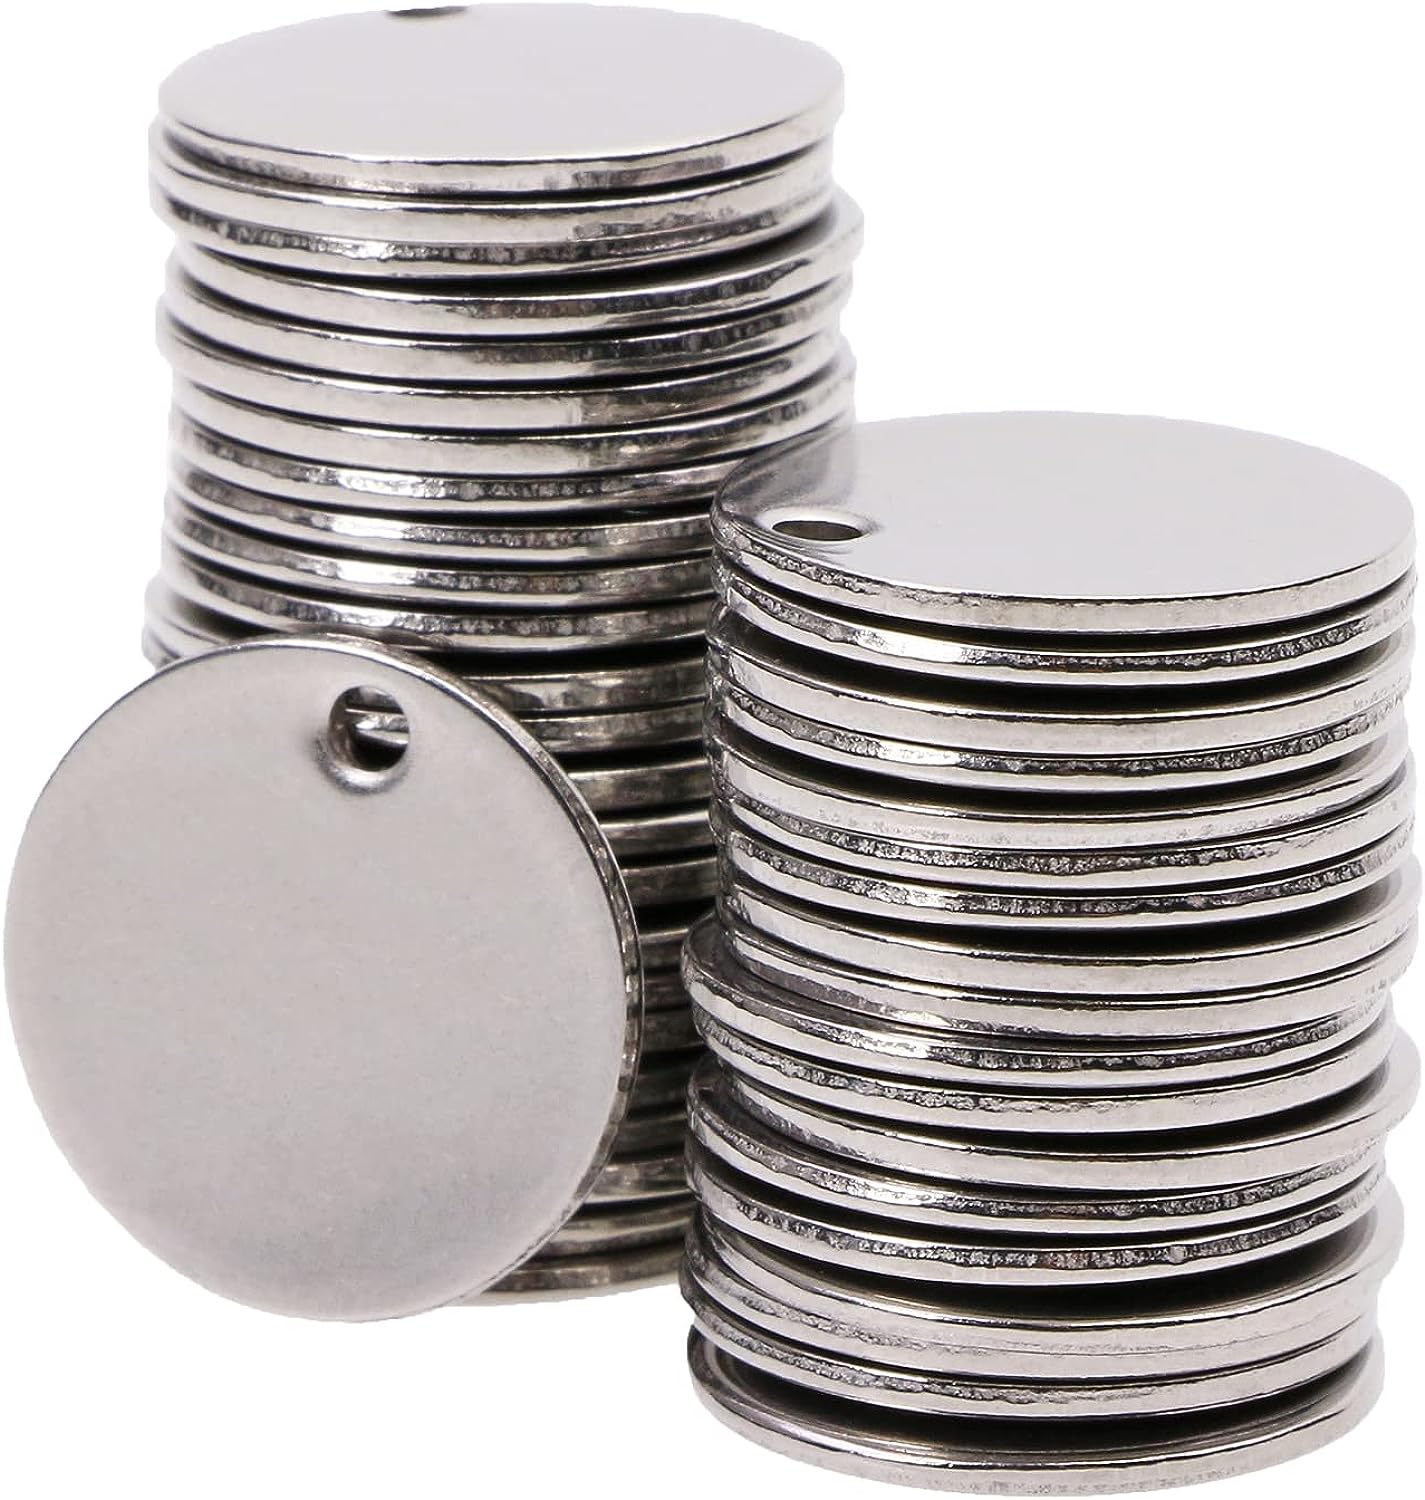 ABBECIAO 1 Inch/25mm Washer Stamping Blanks for DIY Jewelry, Metal Stamping  Tags   ABBECIAO